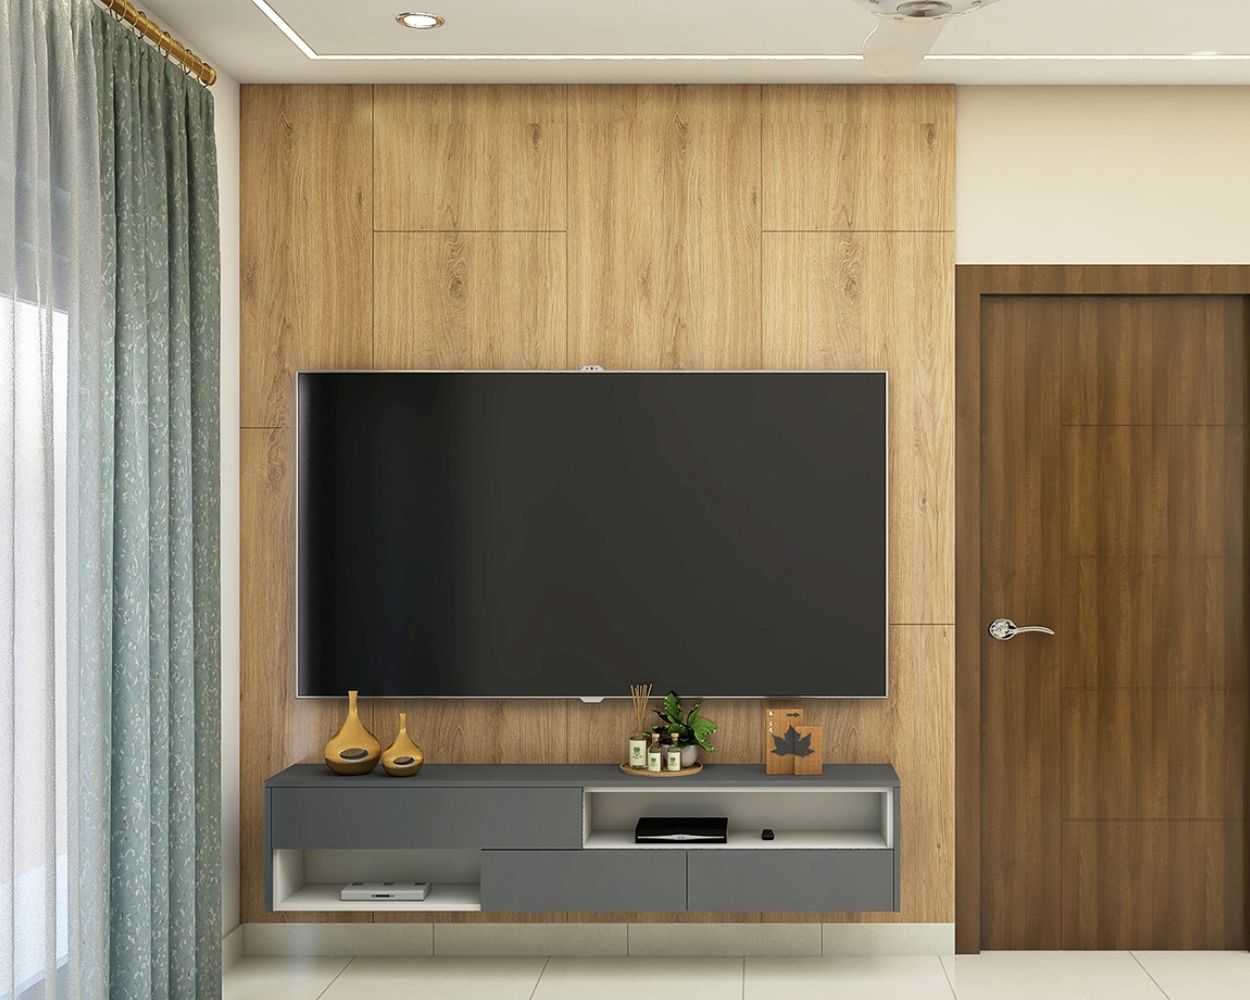 Modern Wall-Mounted Grey TV Unit Design With Wooden Back Panel